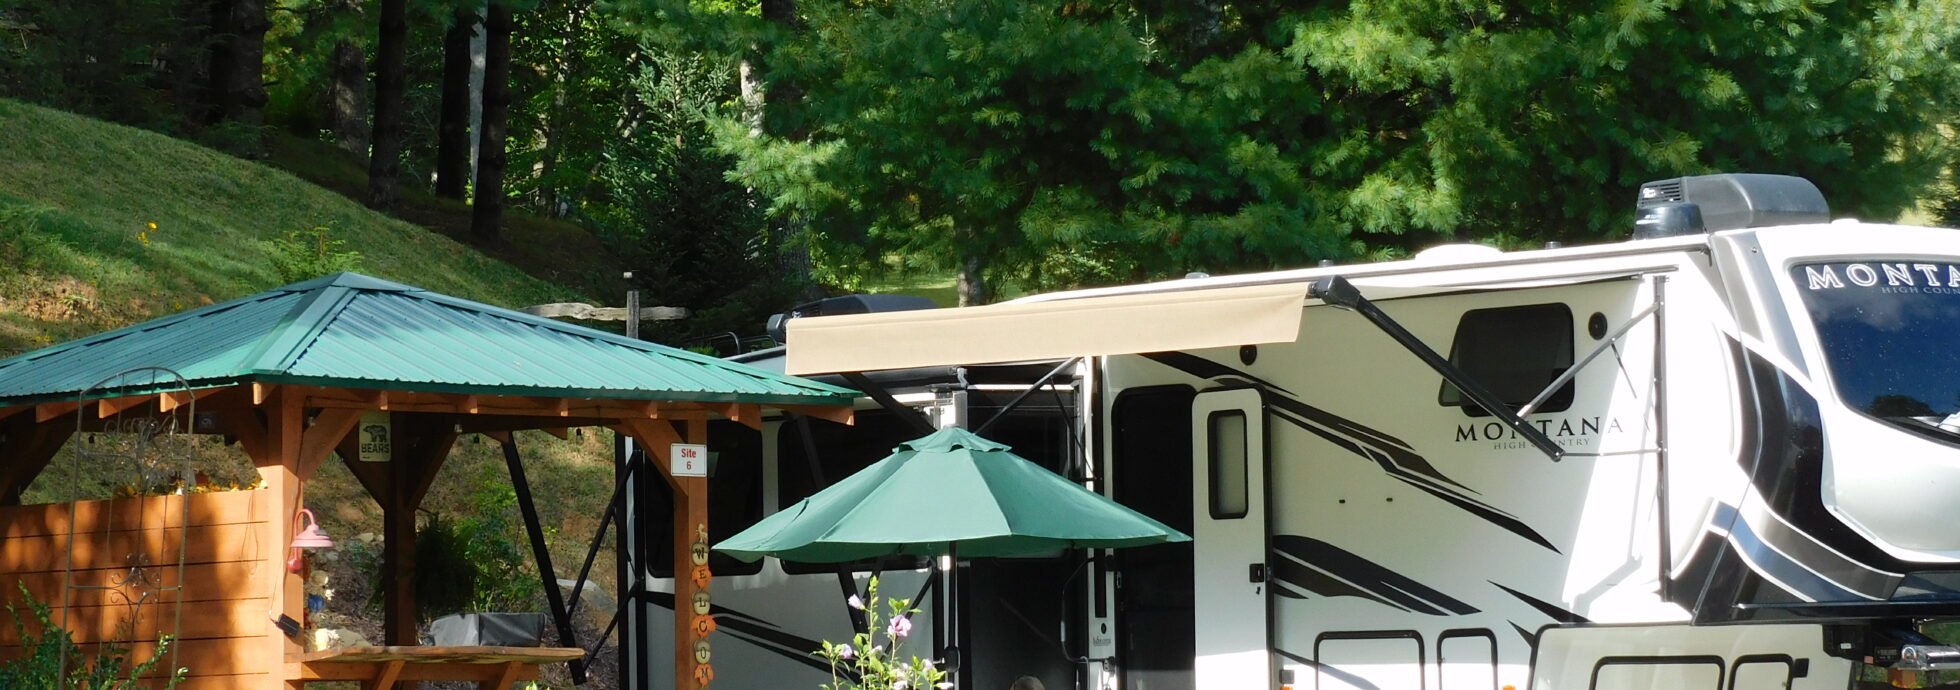 Picture of campsite, with RV backed in, and umbrella showing.